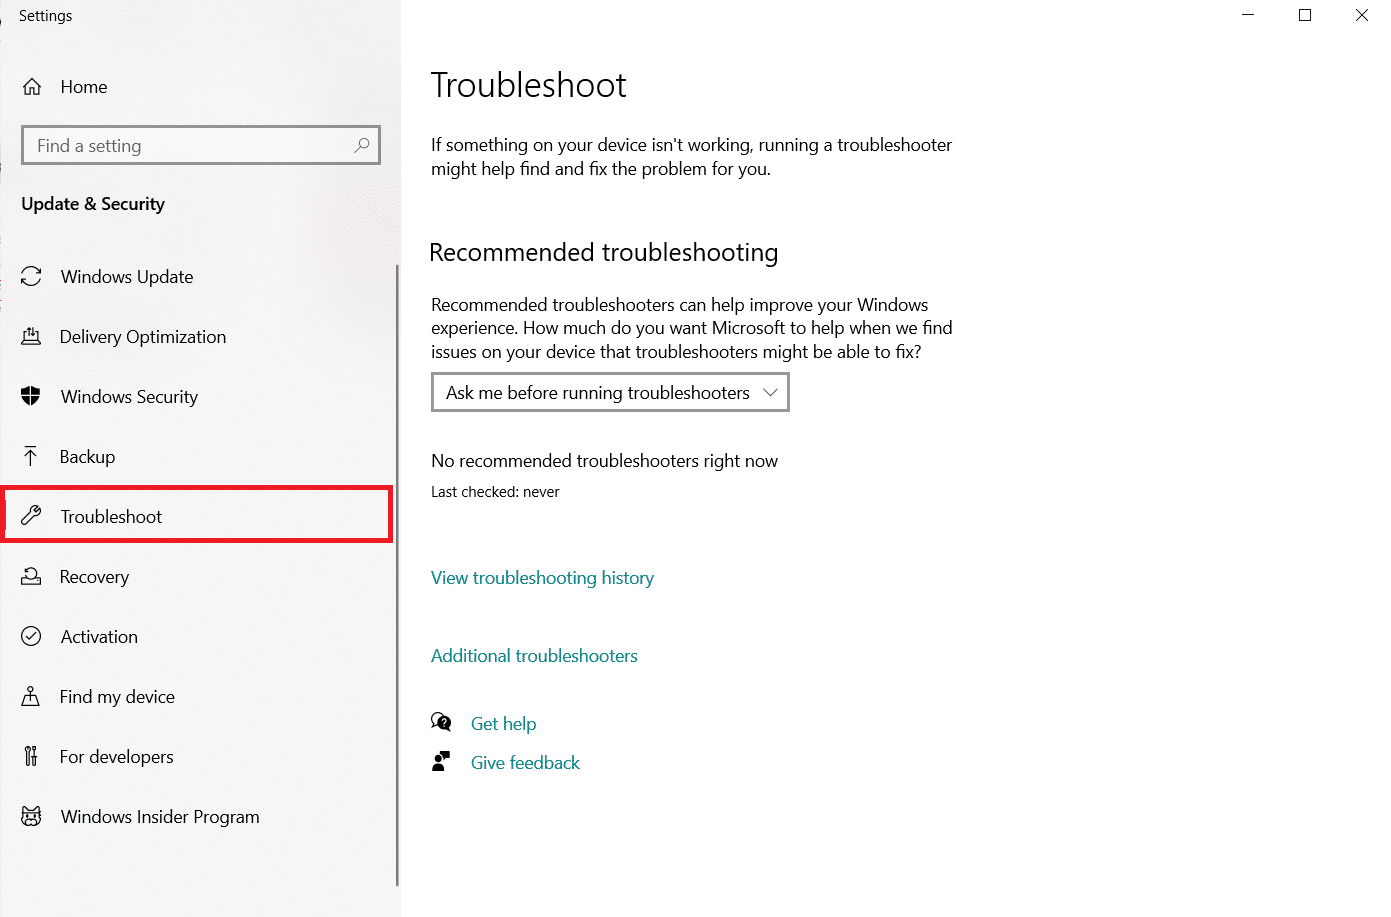 Troubleshoot window in Settings. How to perform Amazon fire stick mirror to PC